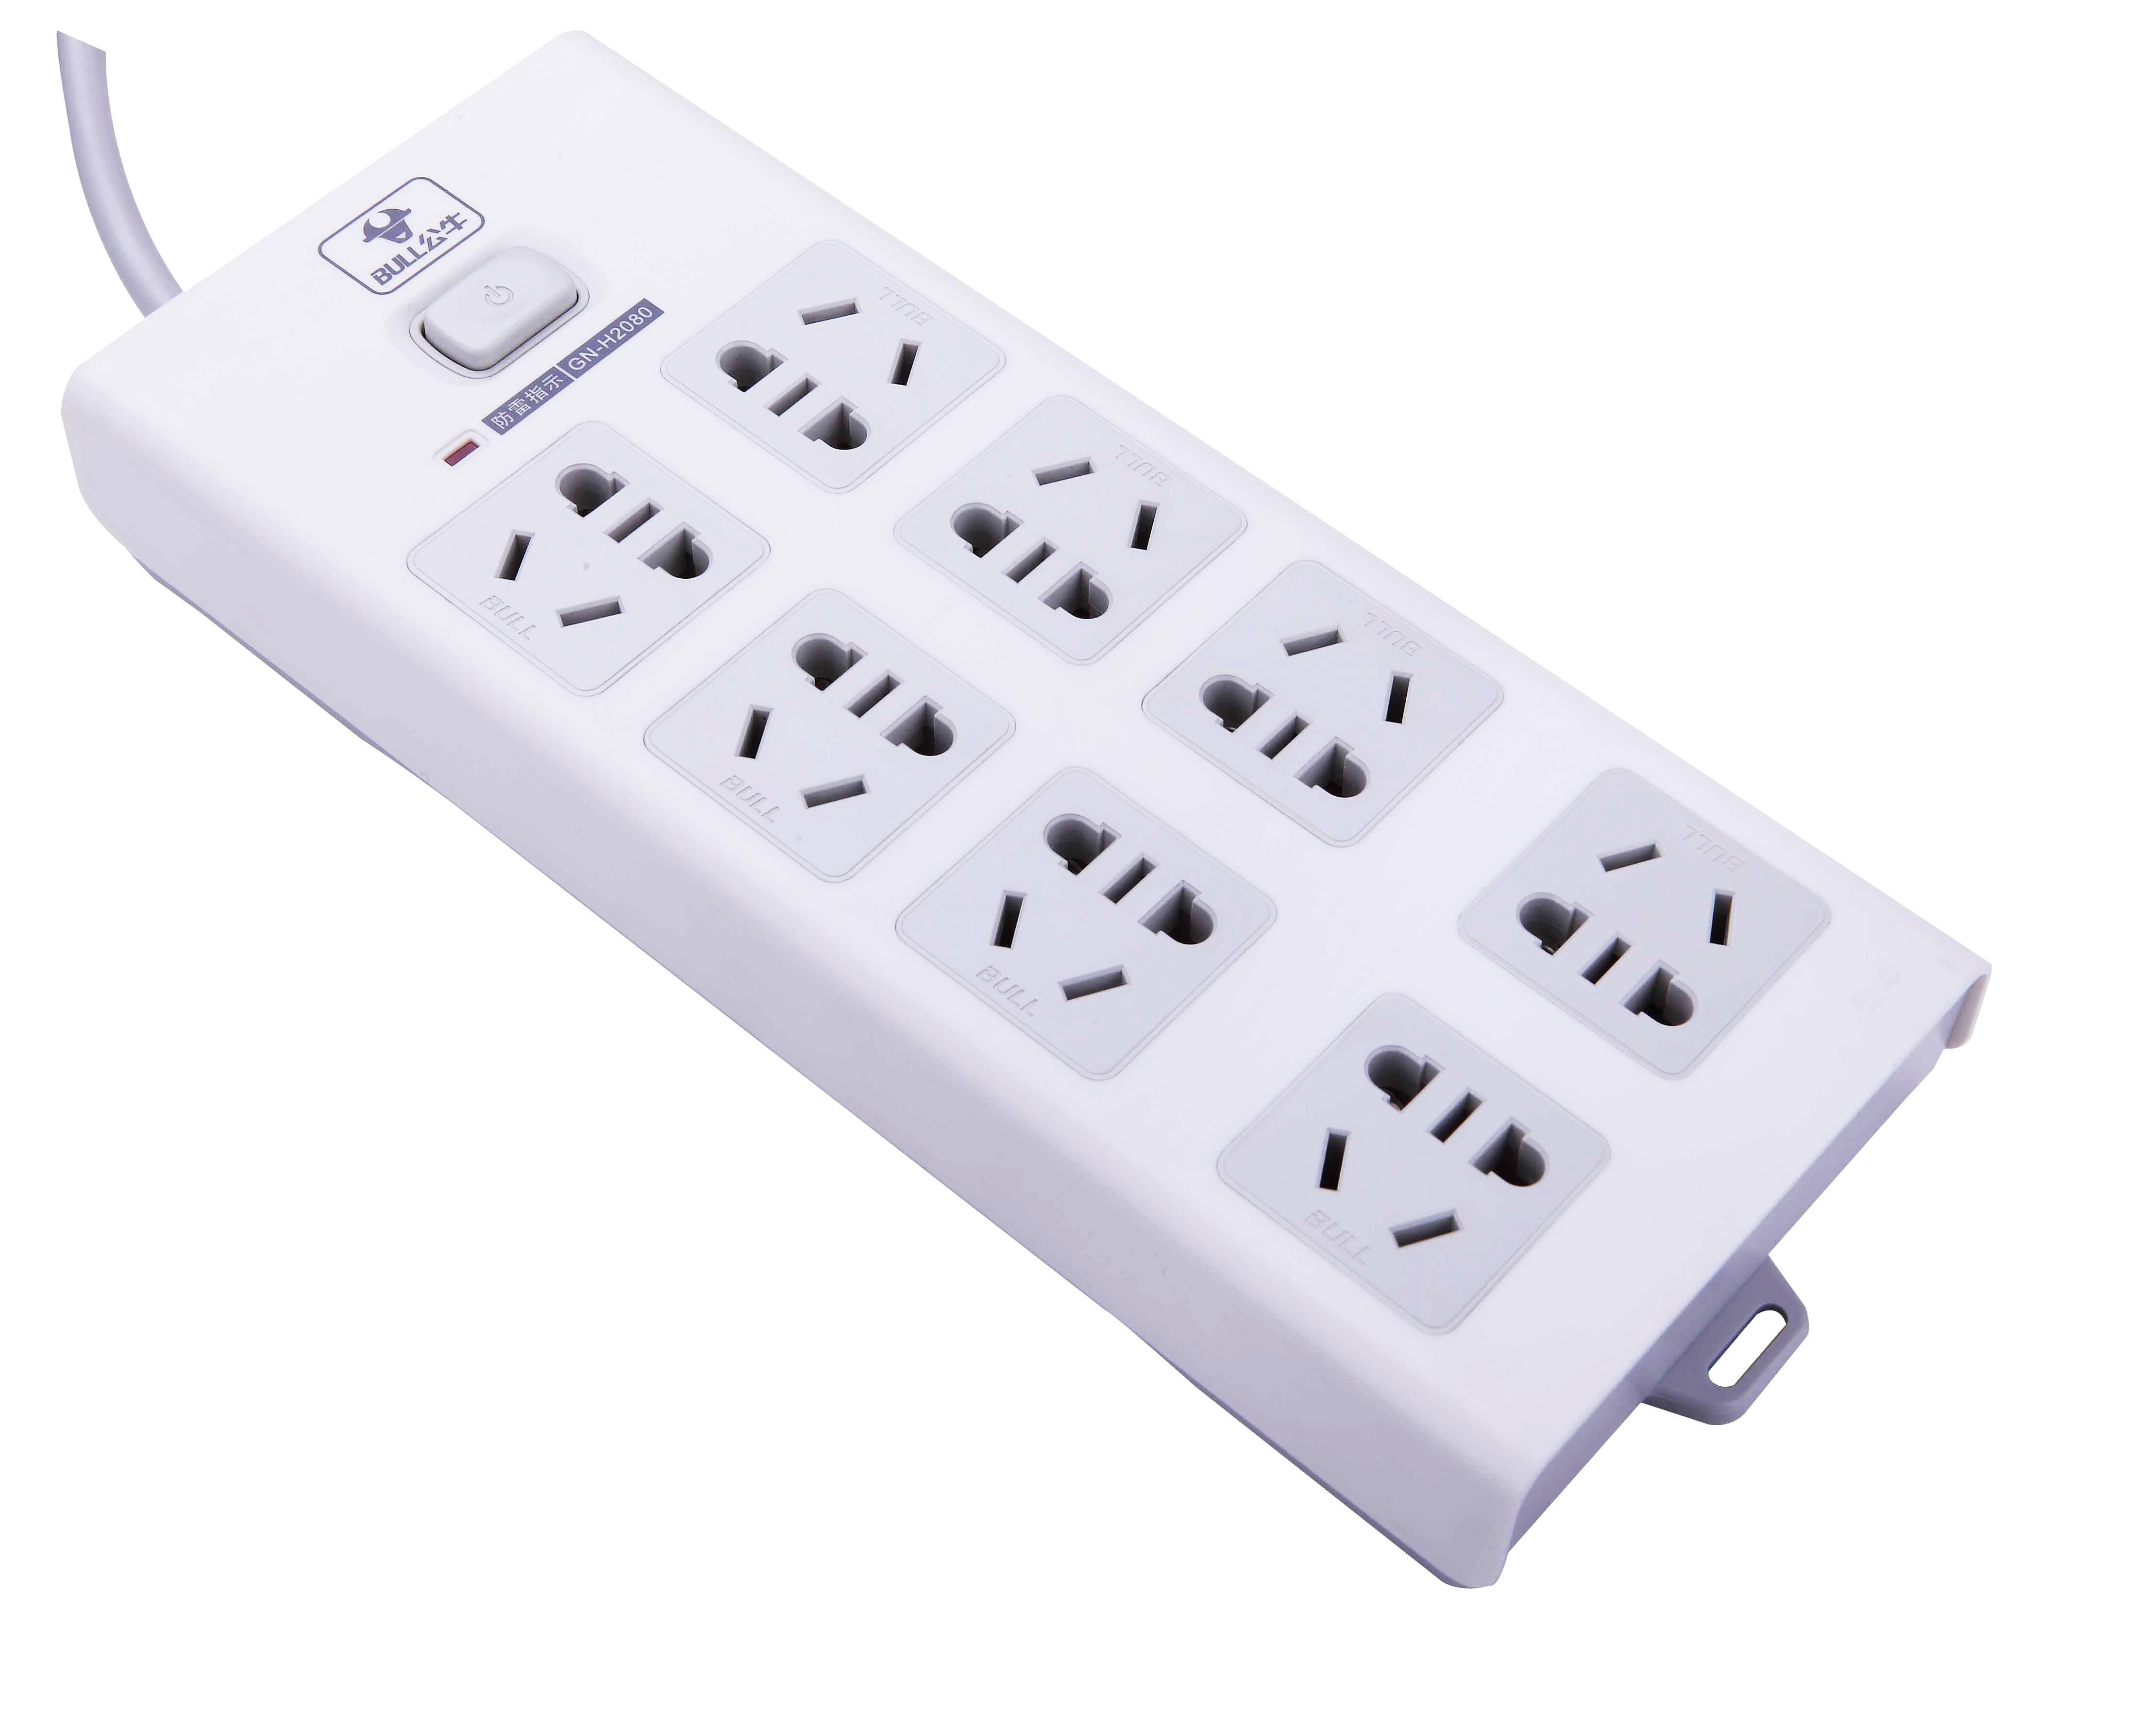 High Heat Resistant and Low Density Polypropylene Material for Portable Sockets